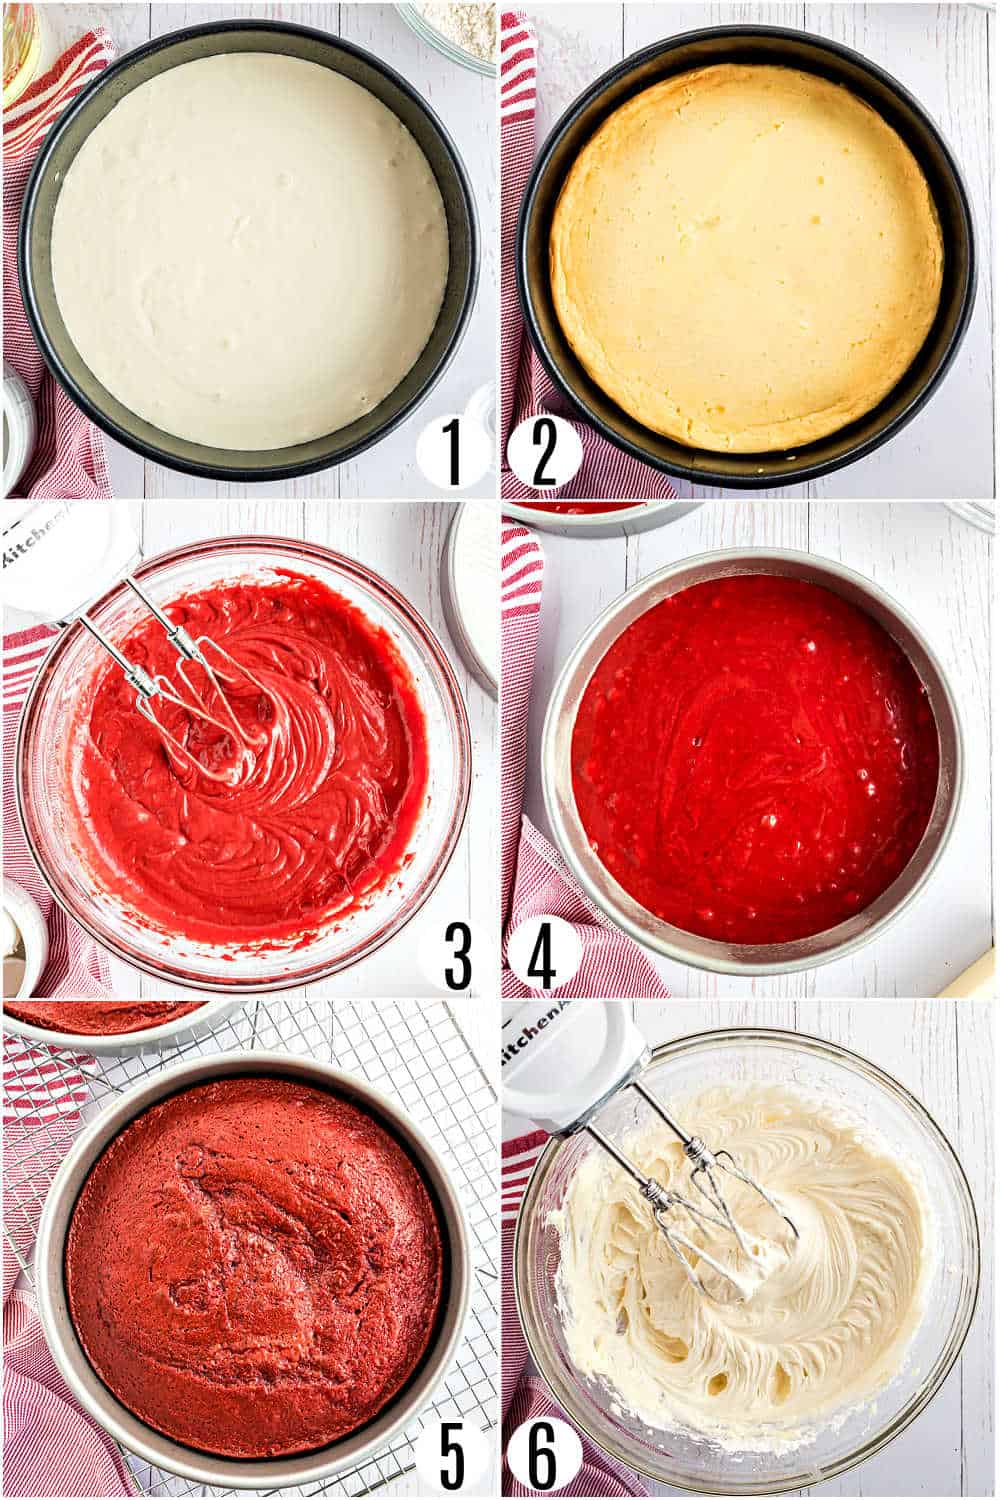 Step by step photos showing how to make red velvet cheesecake cake.